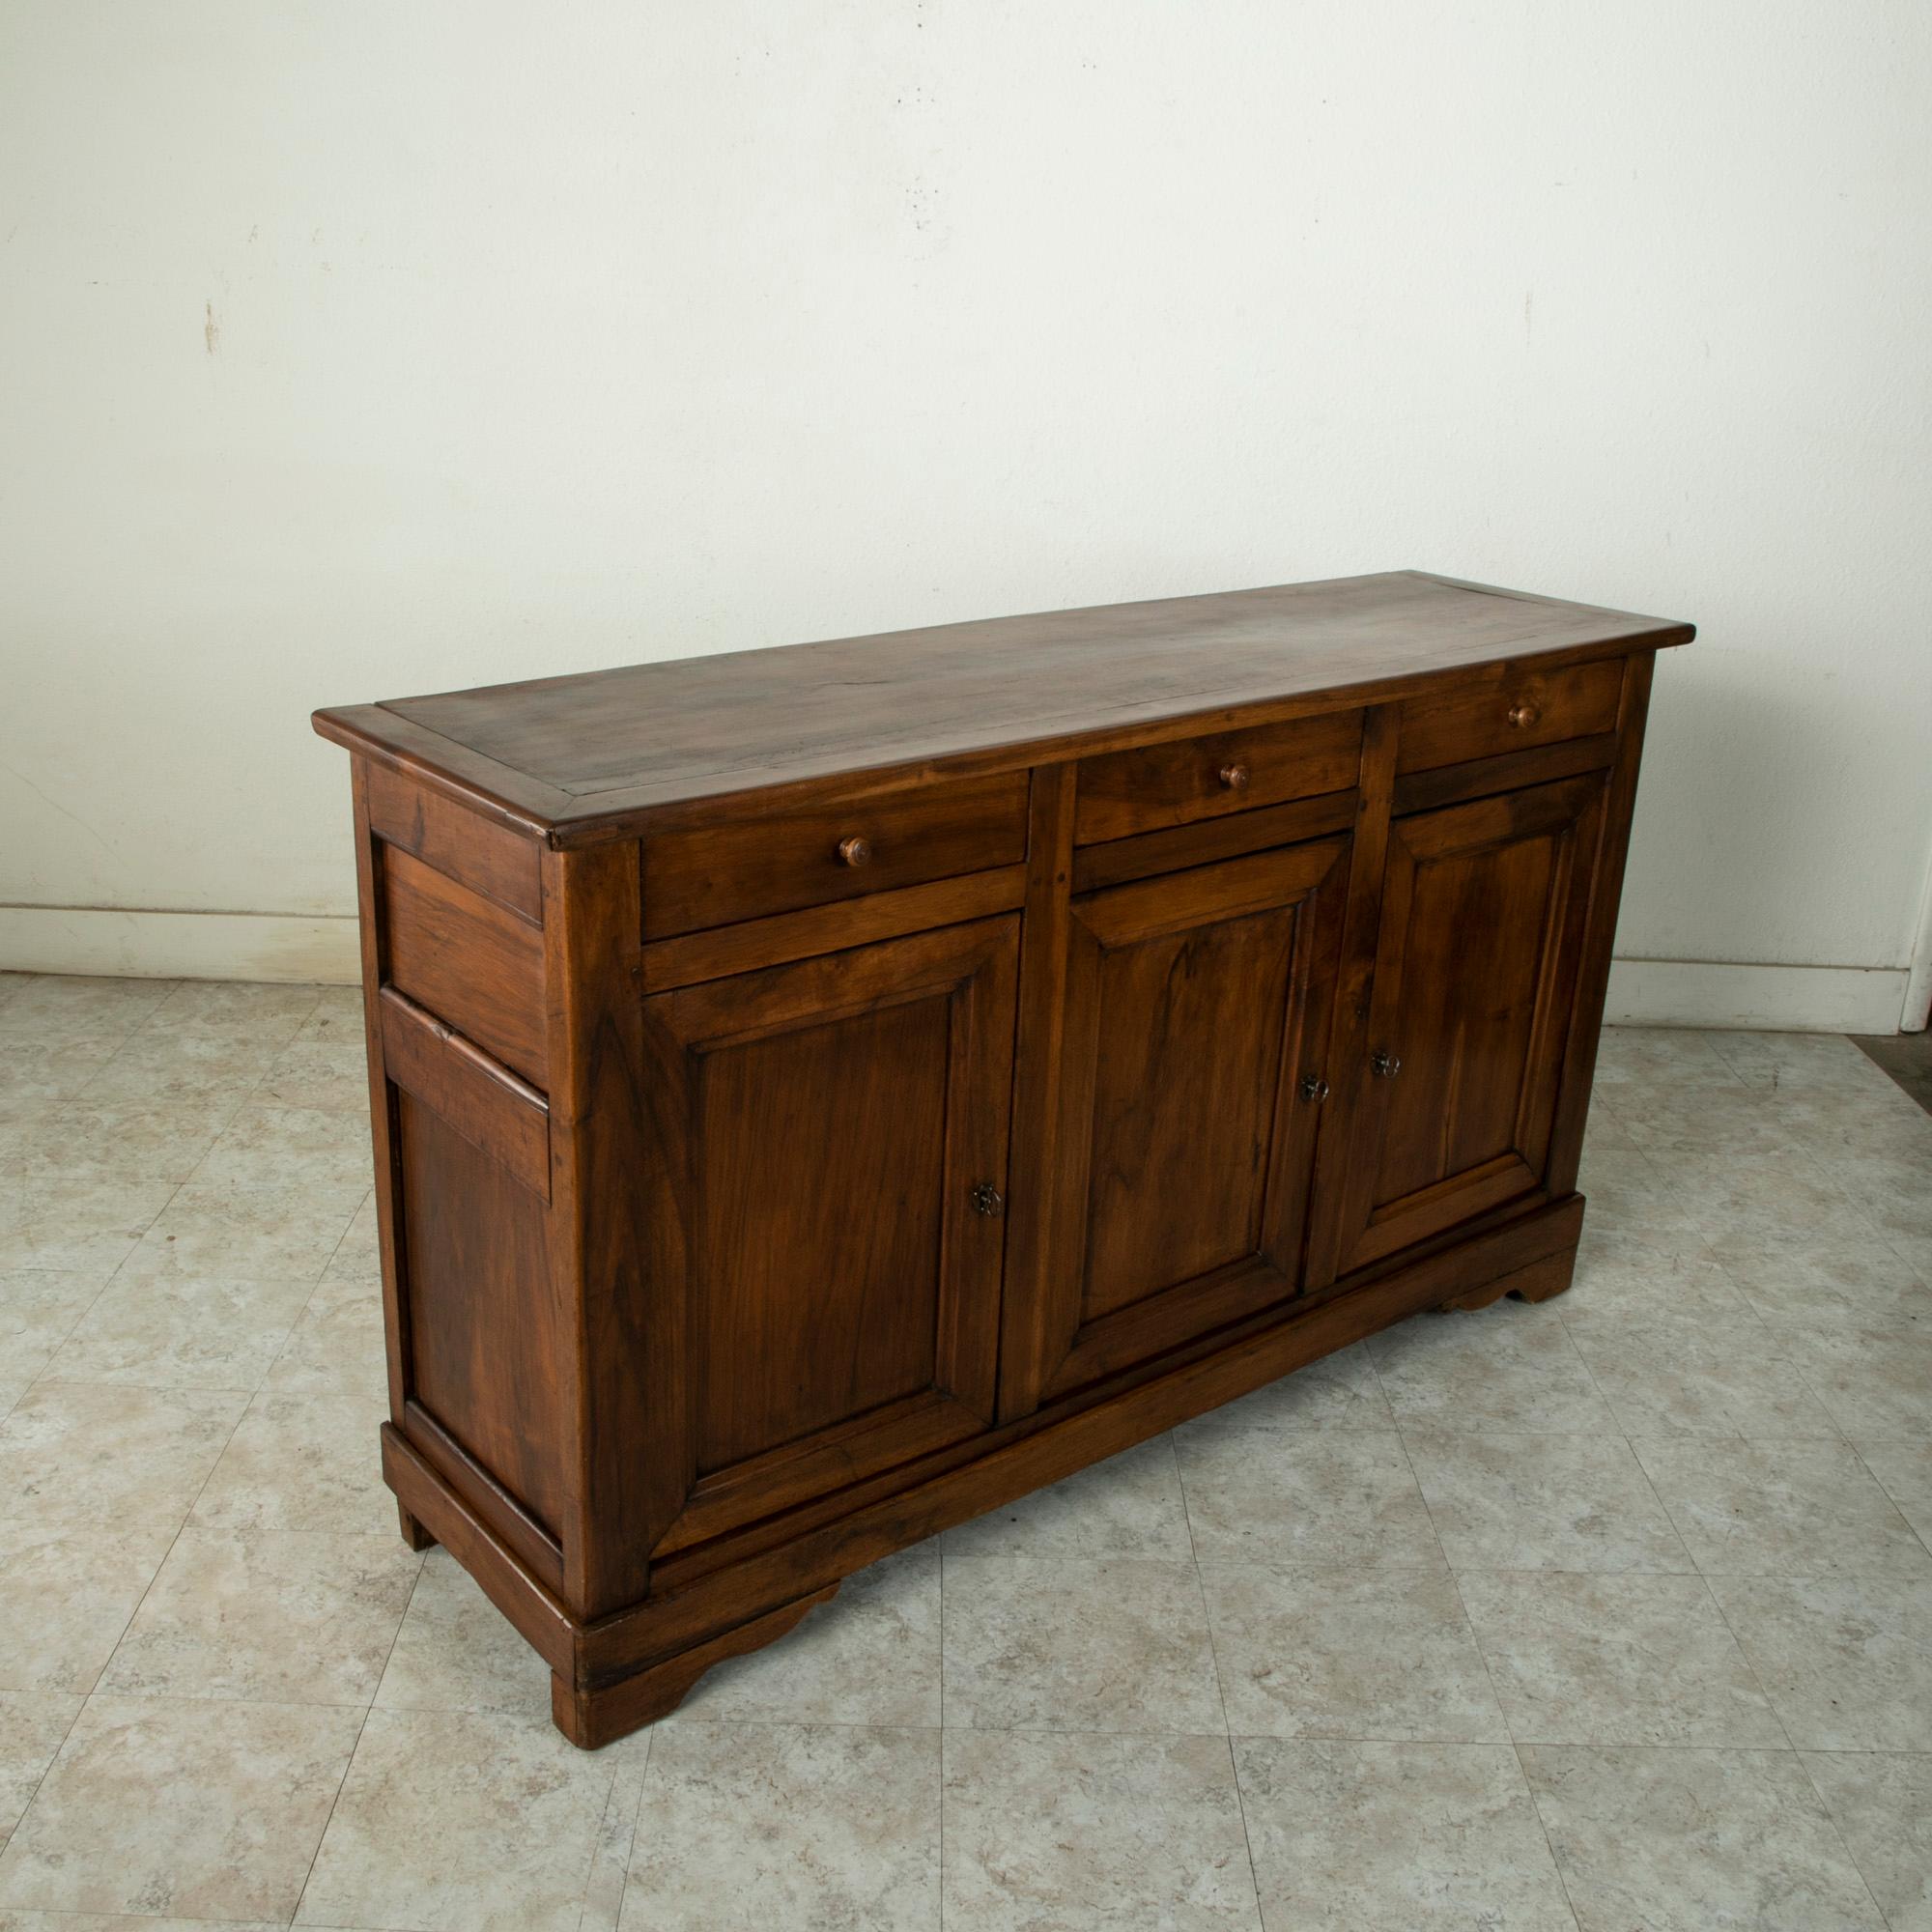 This French Louis Philippe style enfilade or sideboard from the early 20th century is constructed of solid walnut with hand pegged joinery. This server features three doors that open to reveal an interior with a single shelf. Behind each door is a